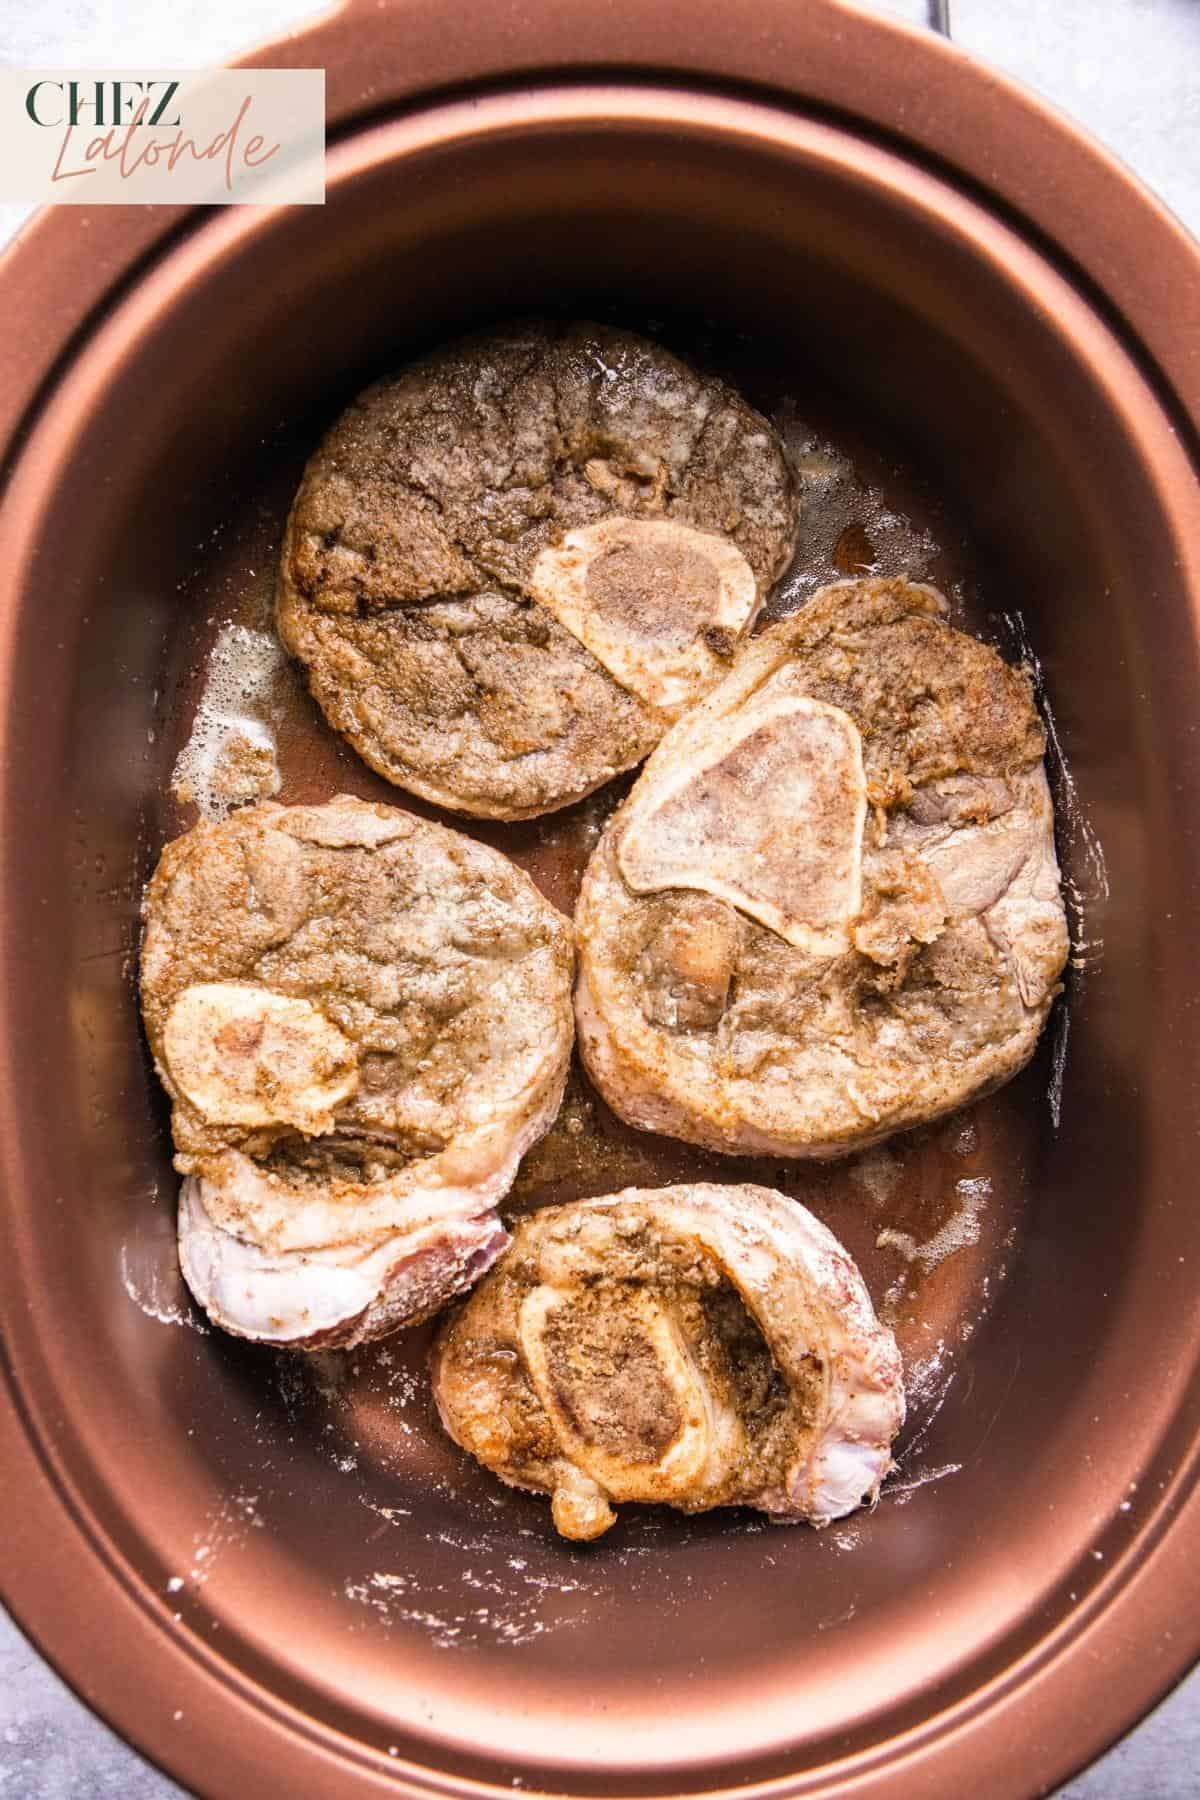 add the beef shanks to the pot. sear each side for 3 to 4 minutes until they become beautiful golden brown.